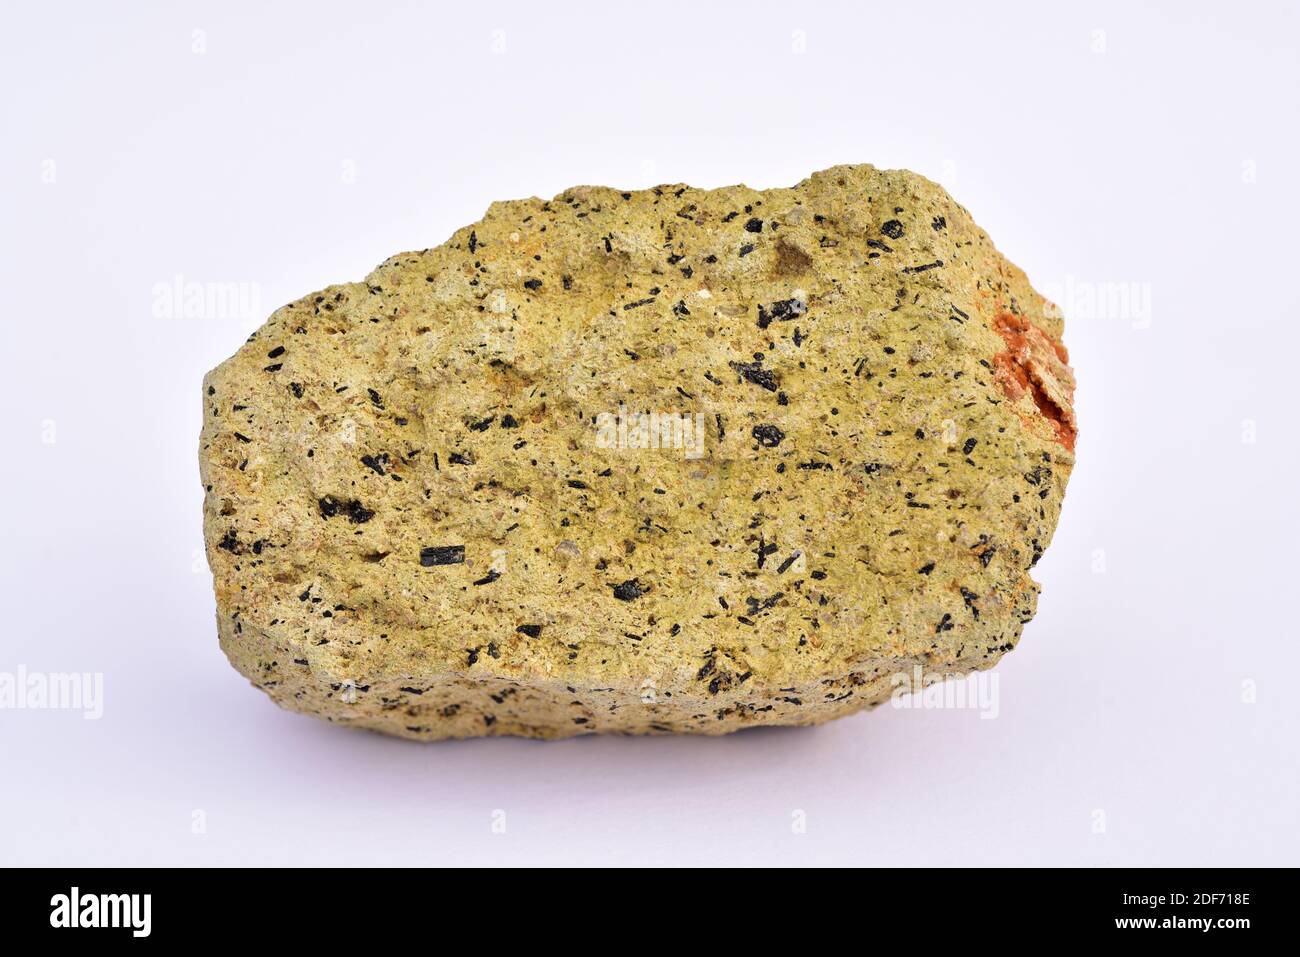 Andesite is an extrusive or volcanic rock. This sample comes from Cabo de Gata Natural Park, Almeria province, Andalucia, Spain. Stock Photo